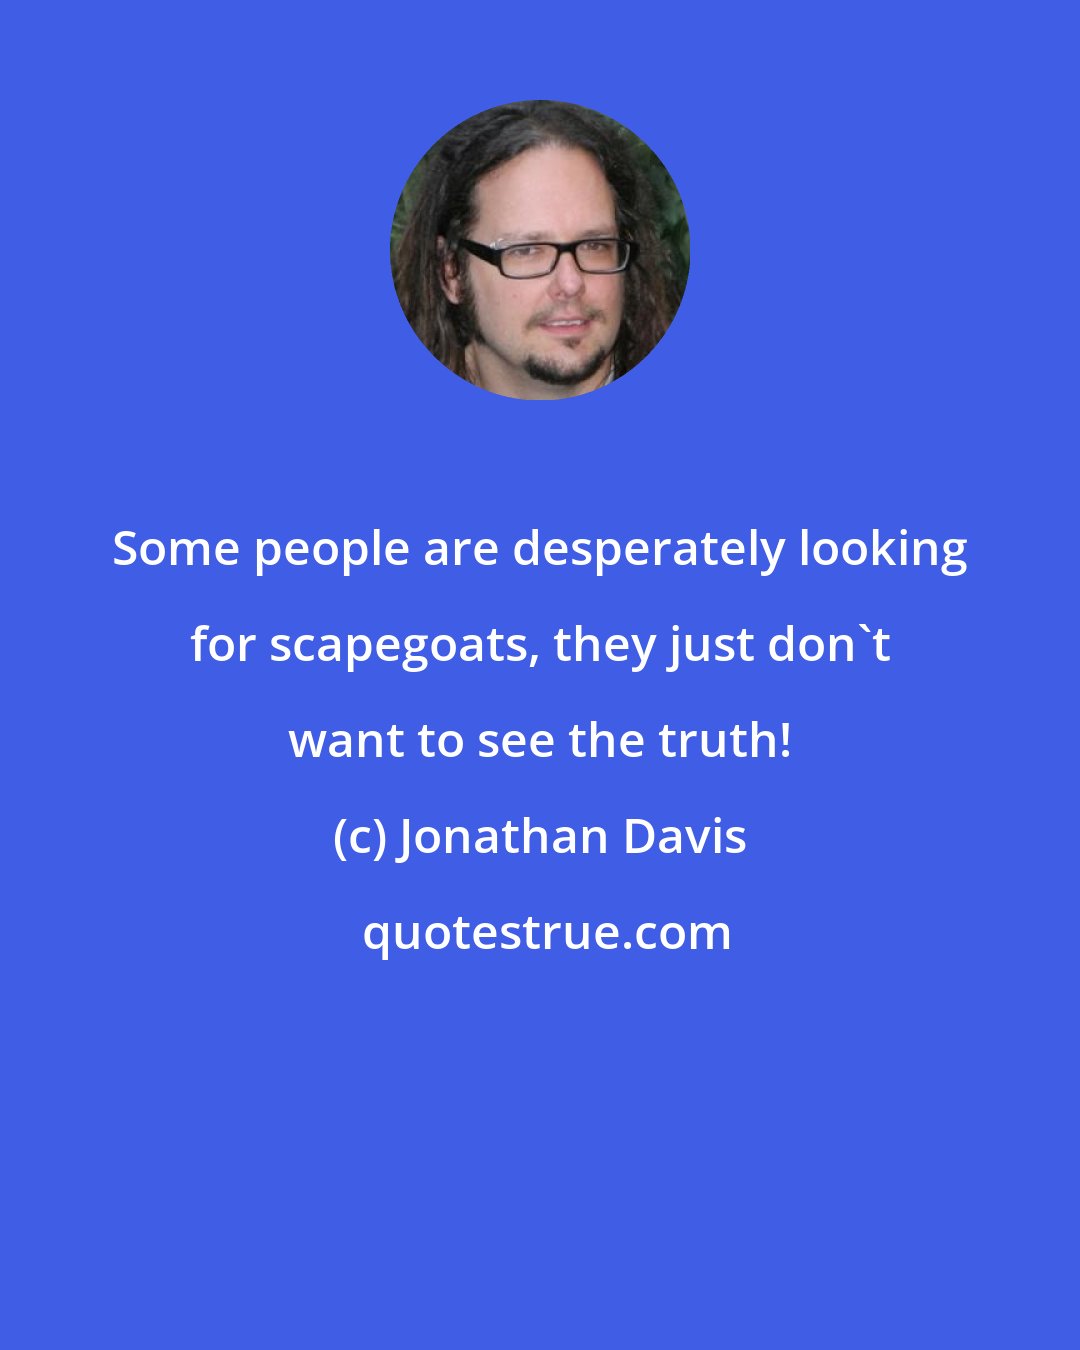 Jonathan Davis: Some people are desperately looking for scapegoats, they just don't want to see the truth!